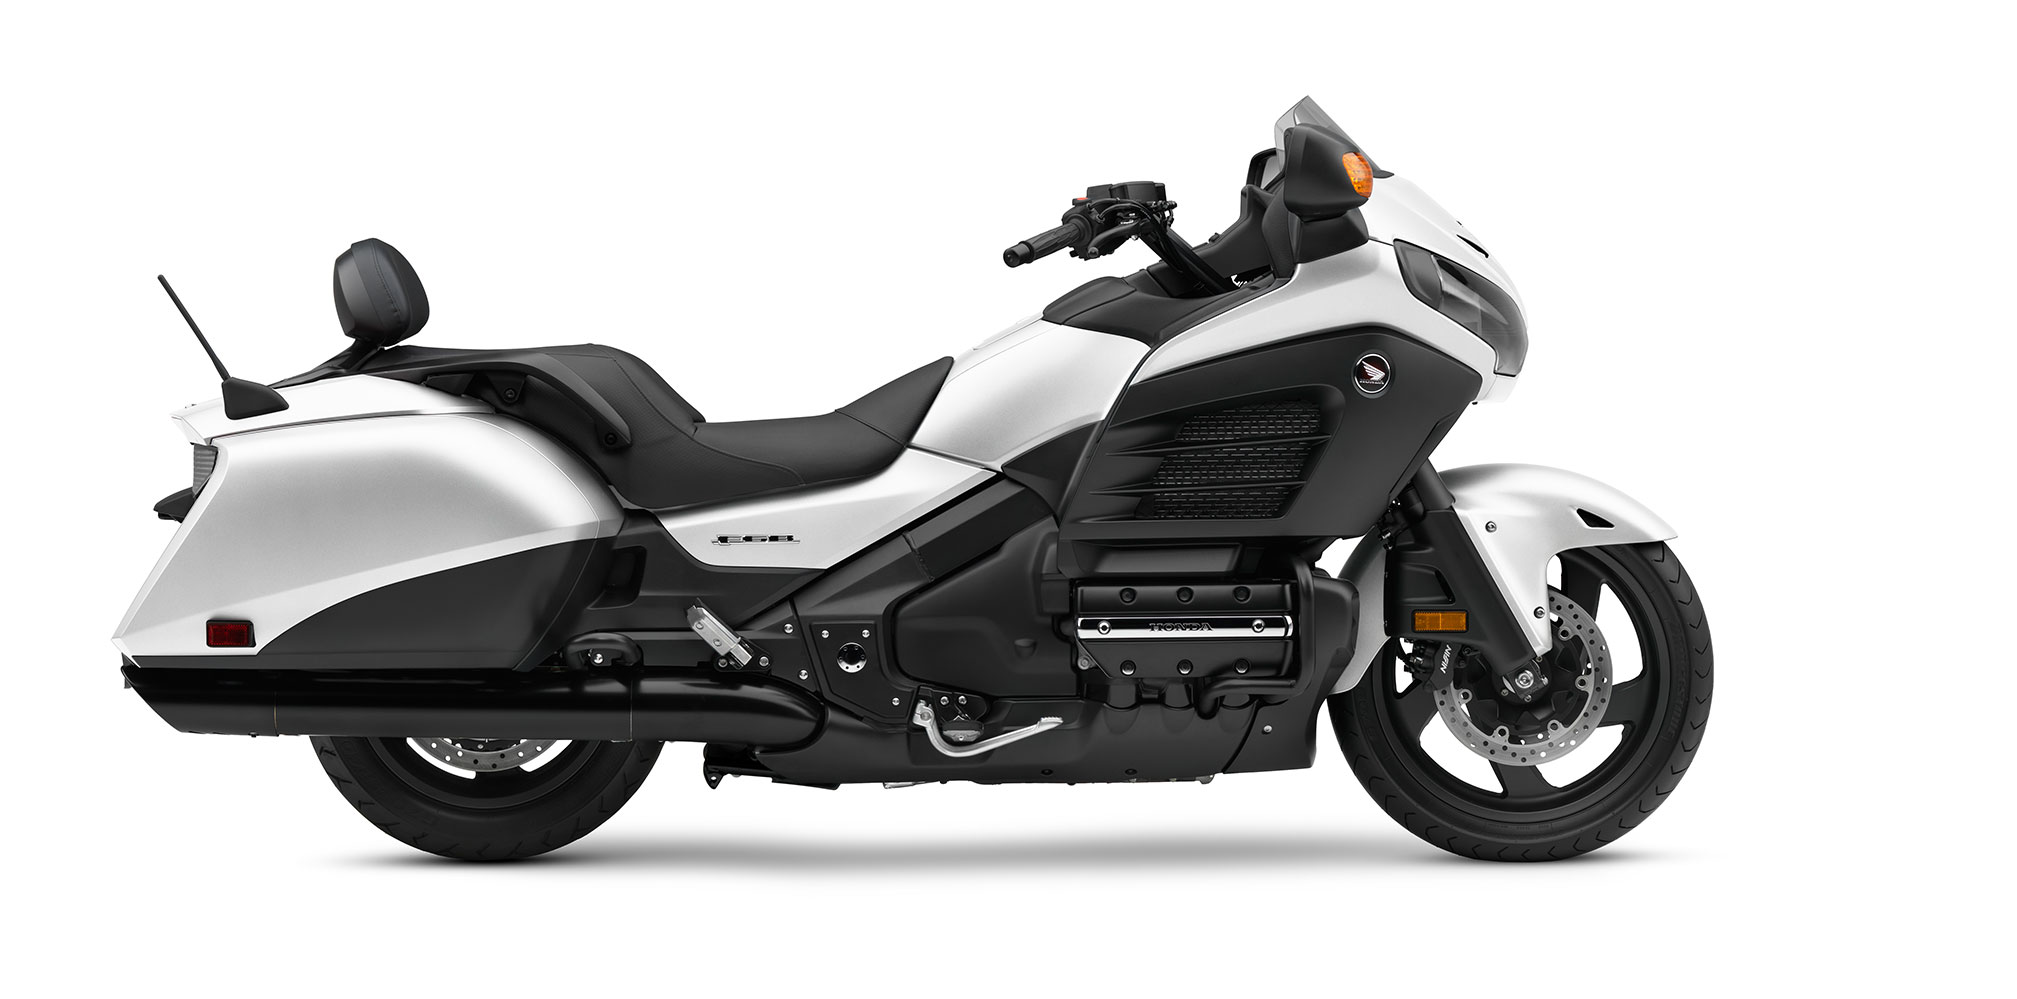 Honda Gold Wing F6B Deluxe 2017 photo - 2